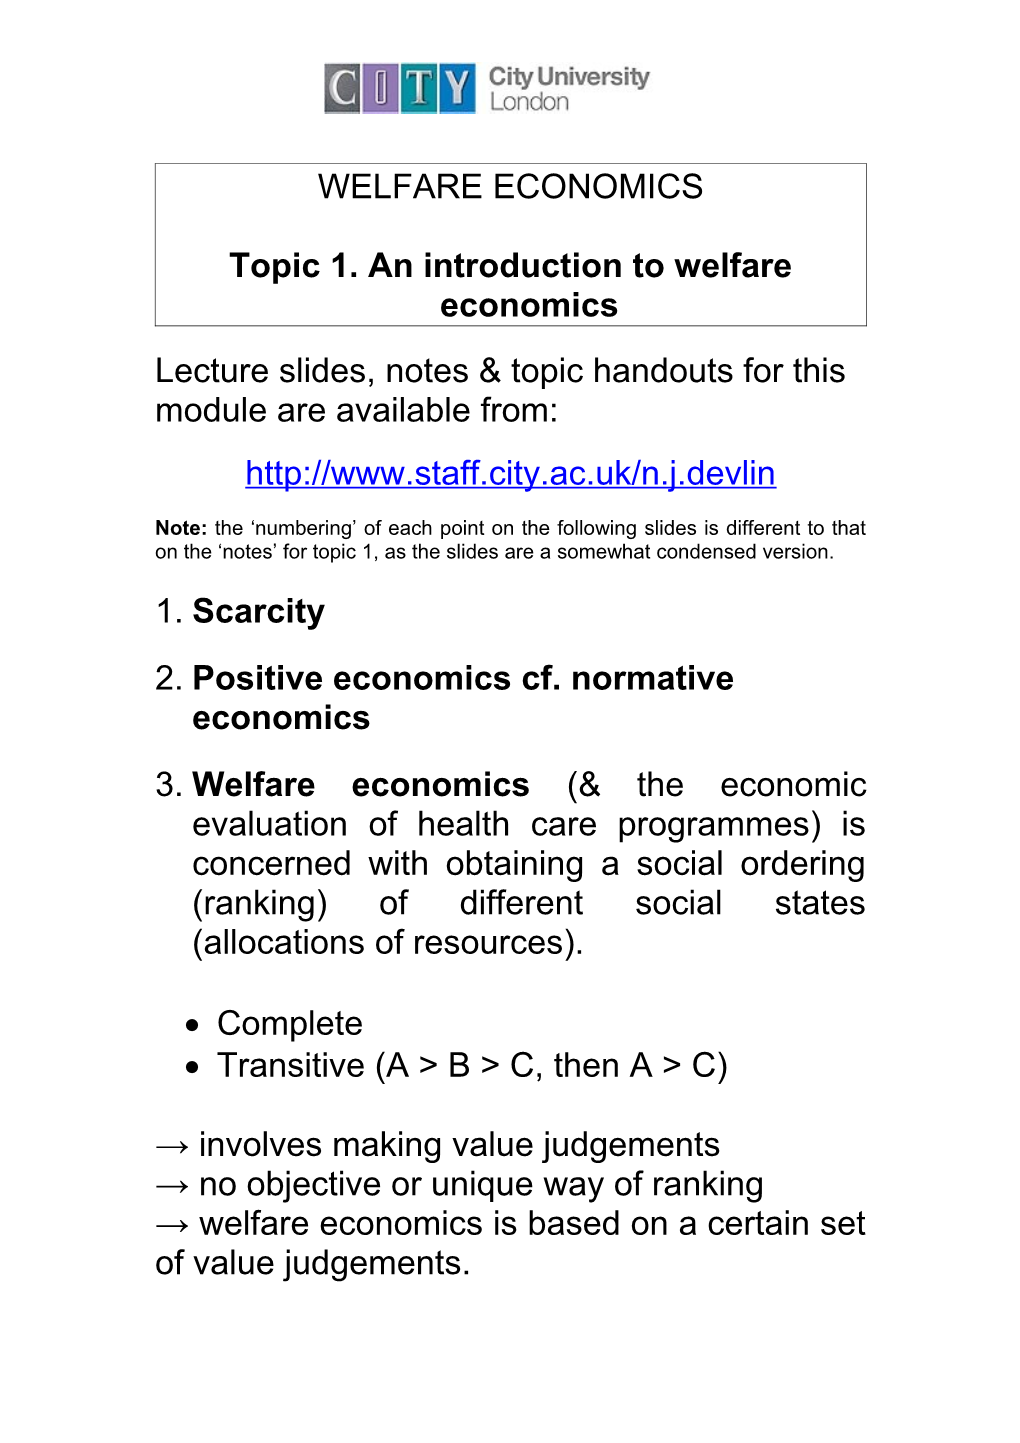 Topic 1. an Introduction to Welfare Economics